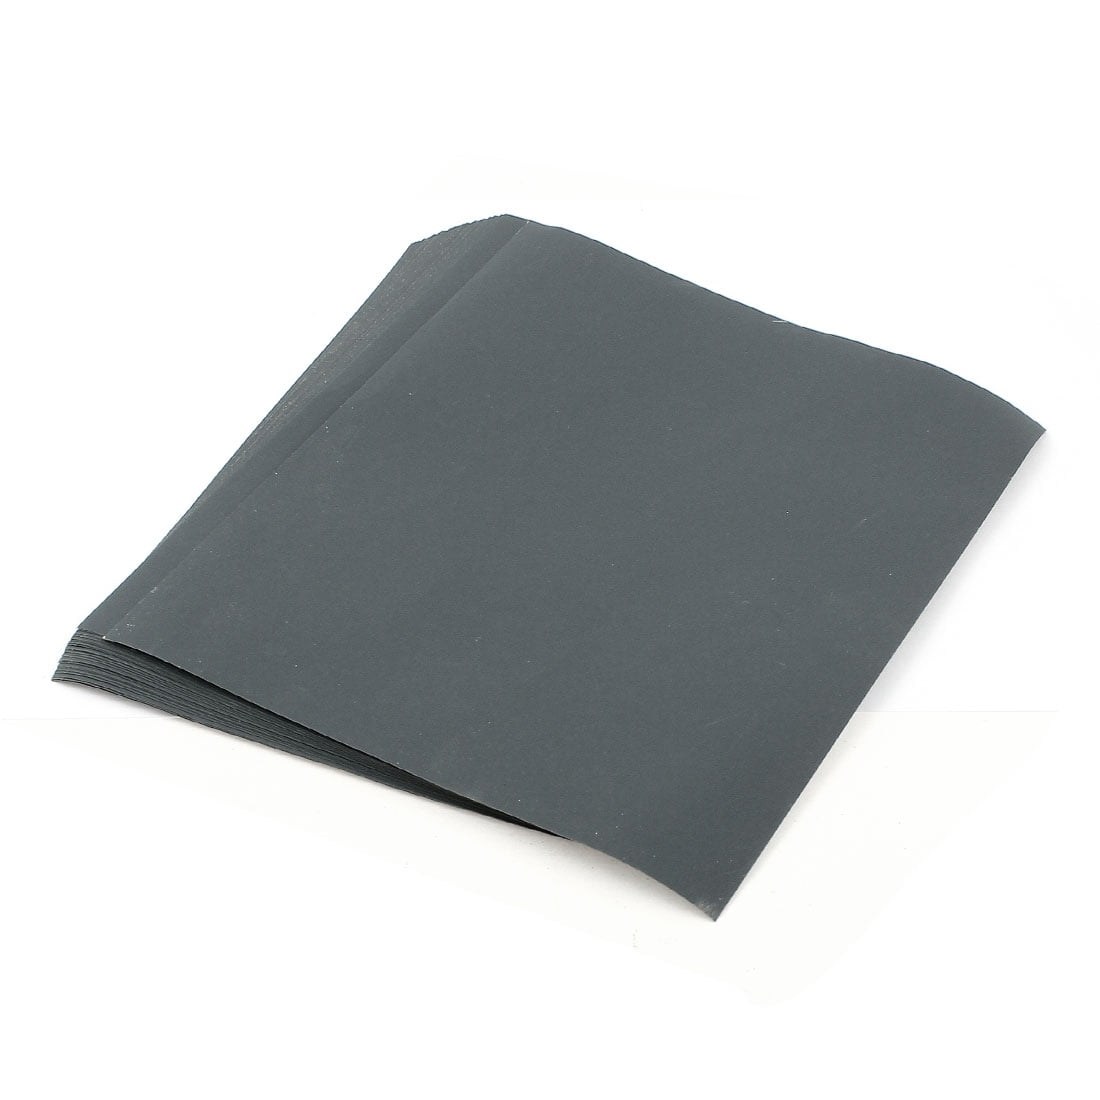 1000 Grit Silicon Carbide Wet And Dry Sanding Sheets 7 Pk X 11 In 9 In